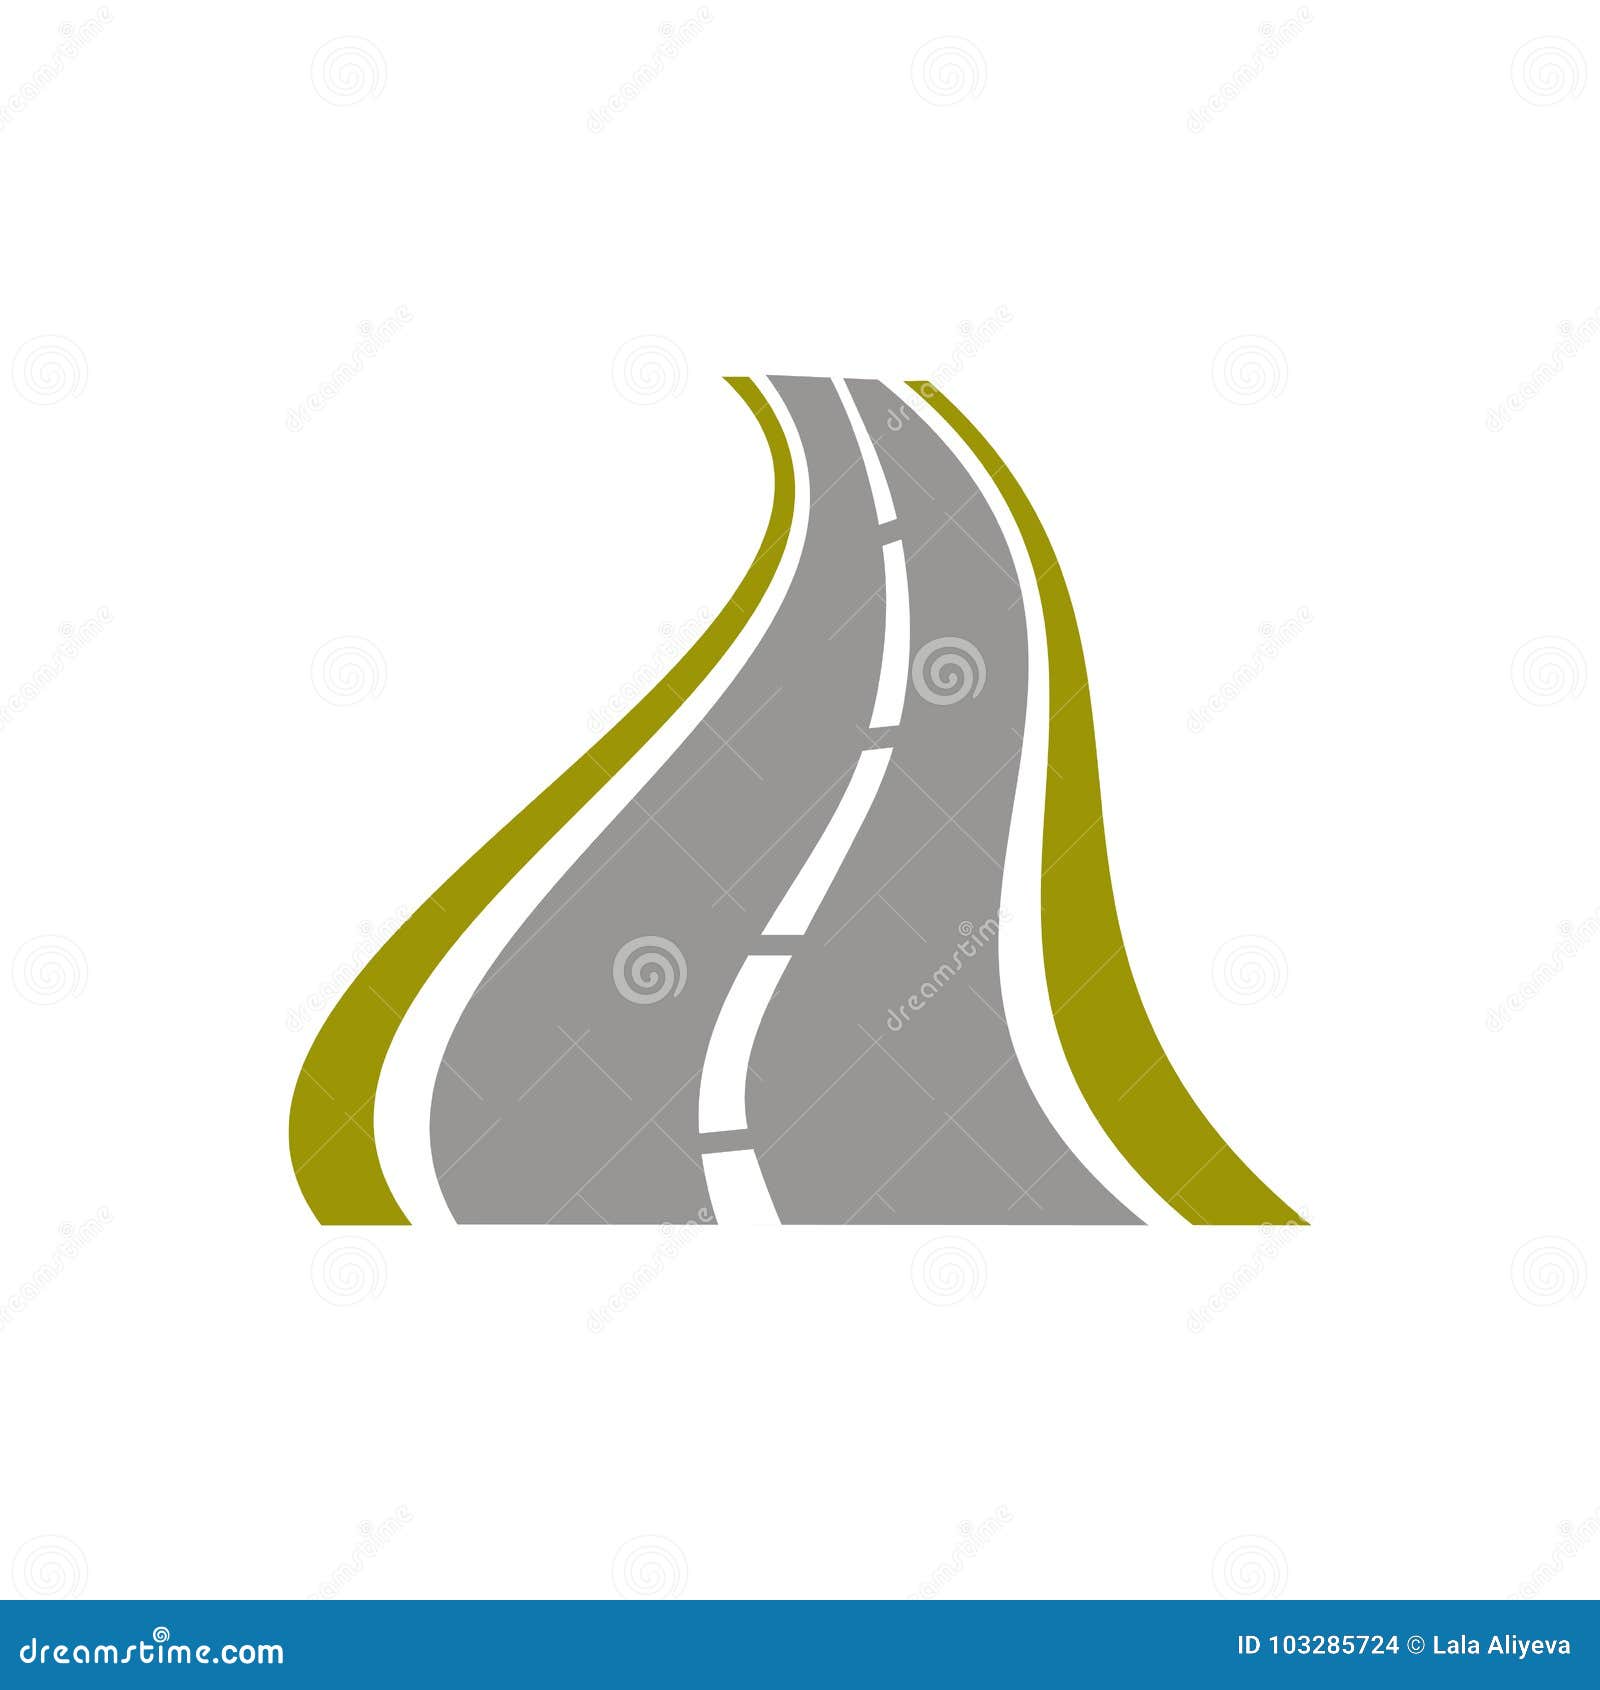 Winding Paved Road Icon On White Background For Travel Or